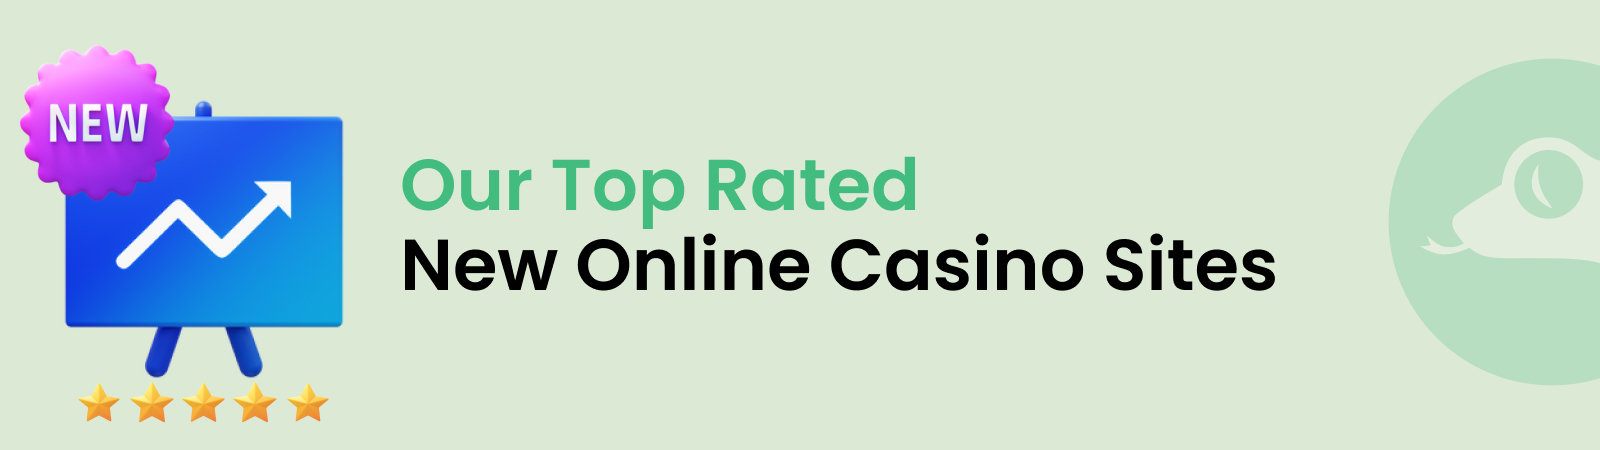 top rated new online casino sites